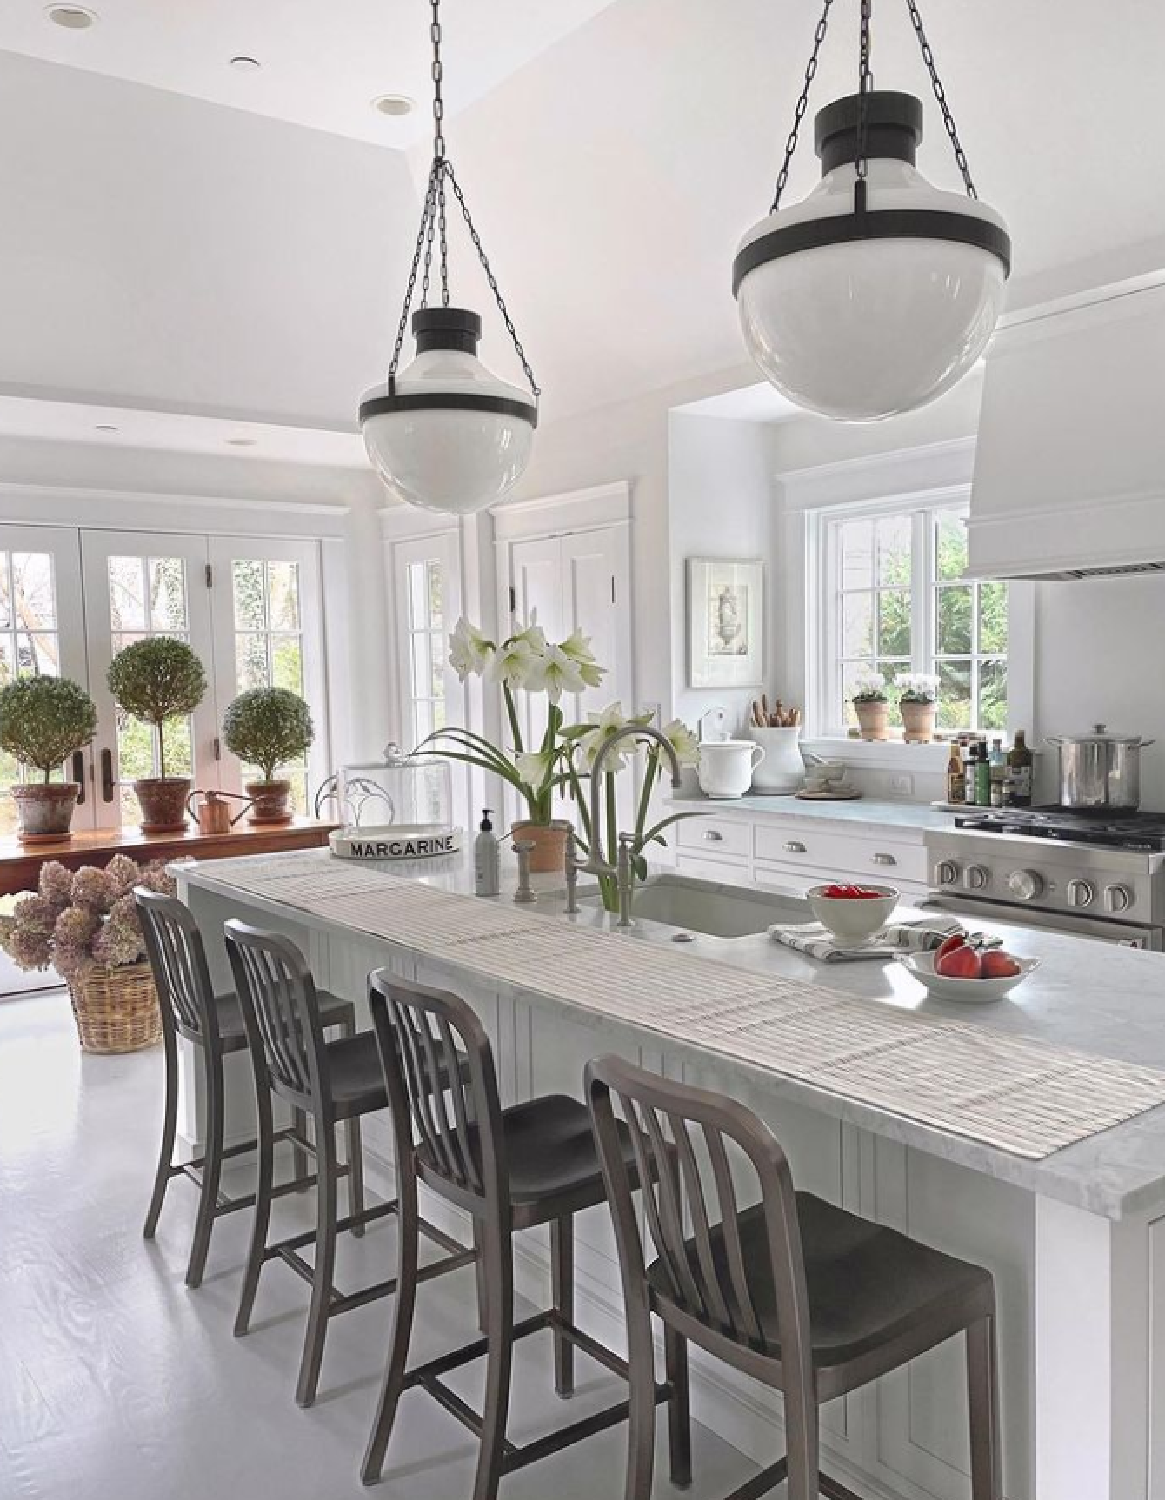 Classic Nordic French white kitchen with light grey painted floors, topiaries near window, and classic pendants (Circa Lighting) over island - Loi of Tone on Tone. #whitekitchens #toneontone #bmshoreline #bmchantillylace